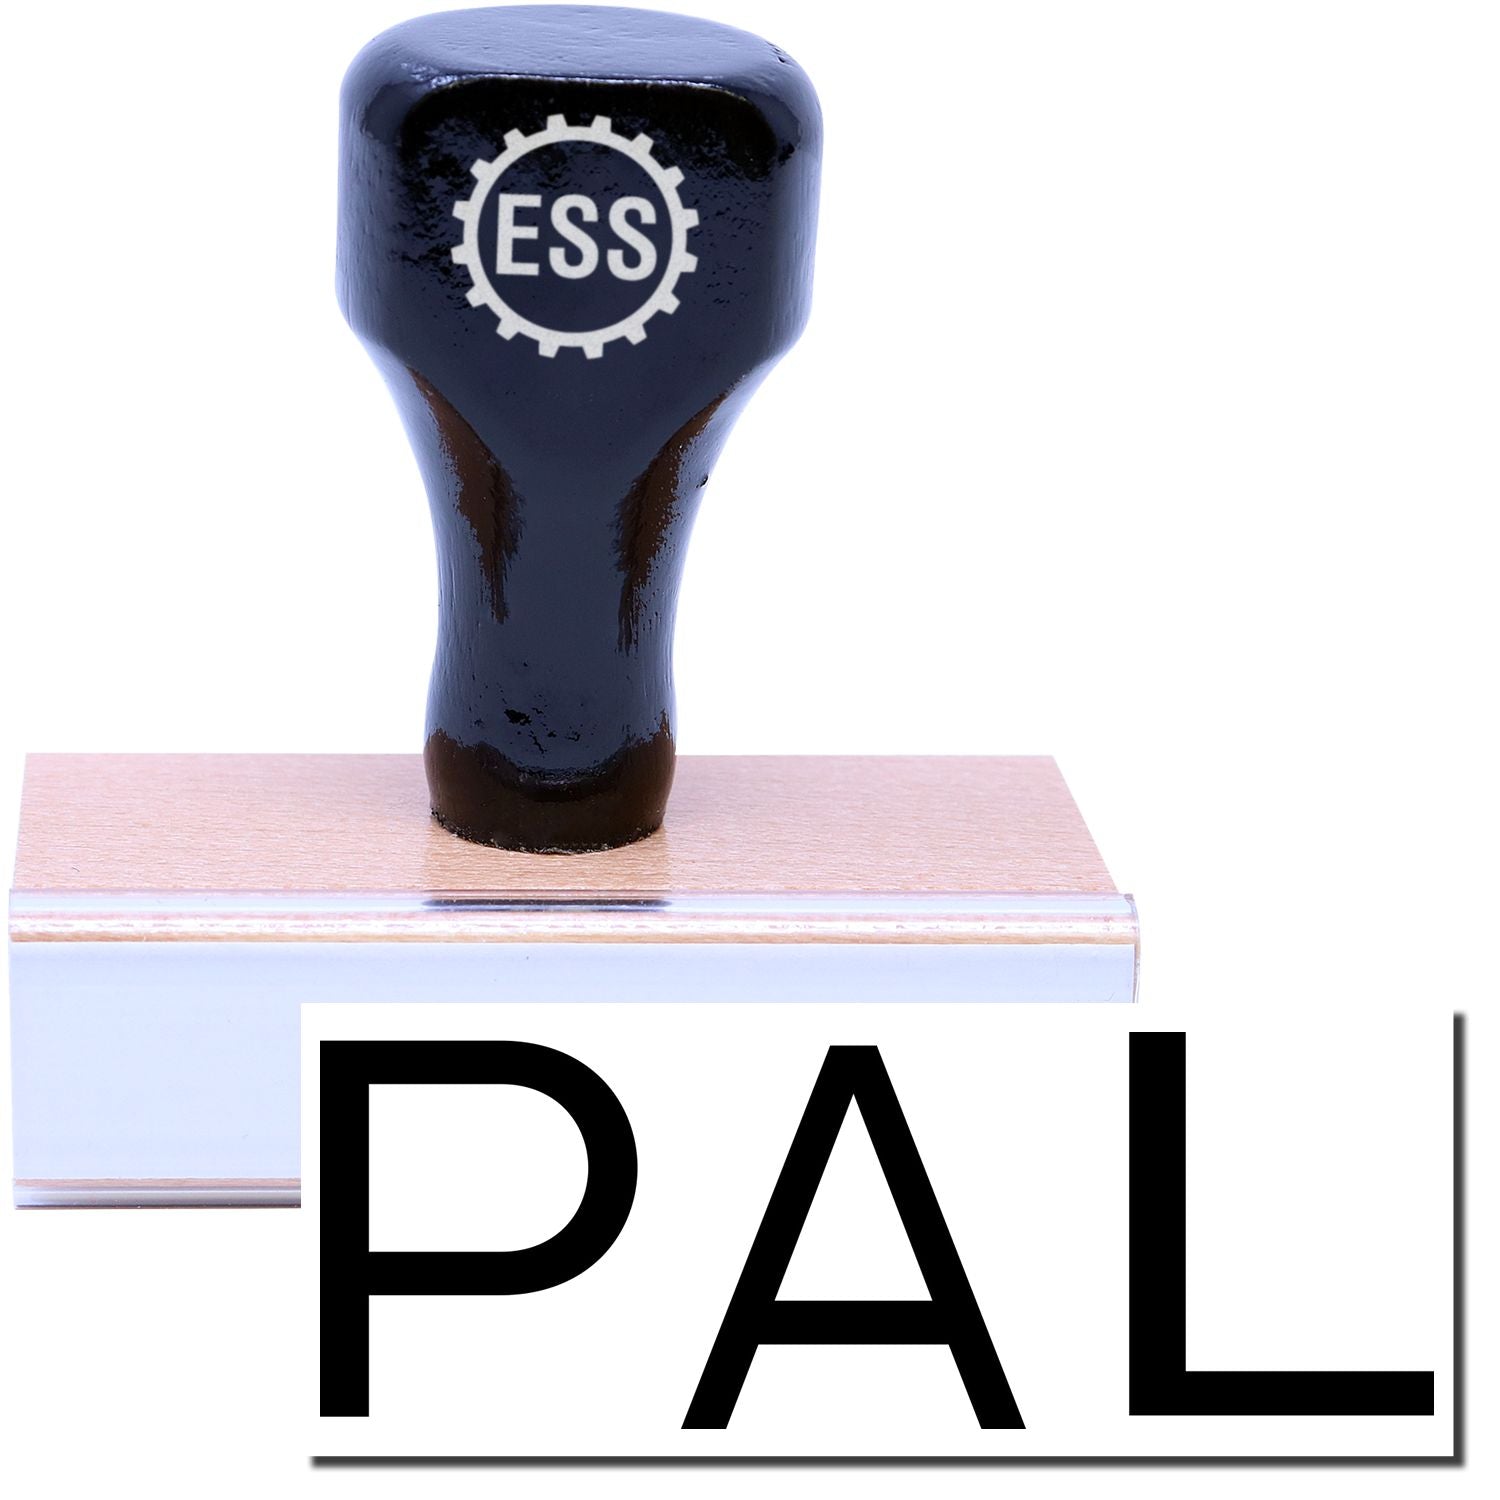 A stock office rubber stamp with a stamped image showing how the text "PAL" is displayed after stamping.